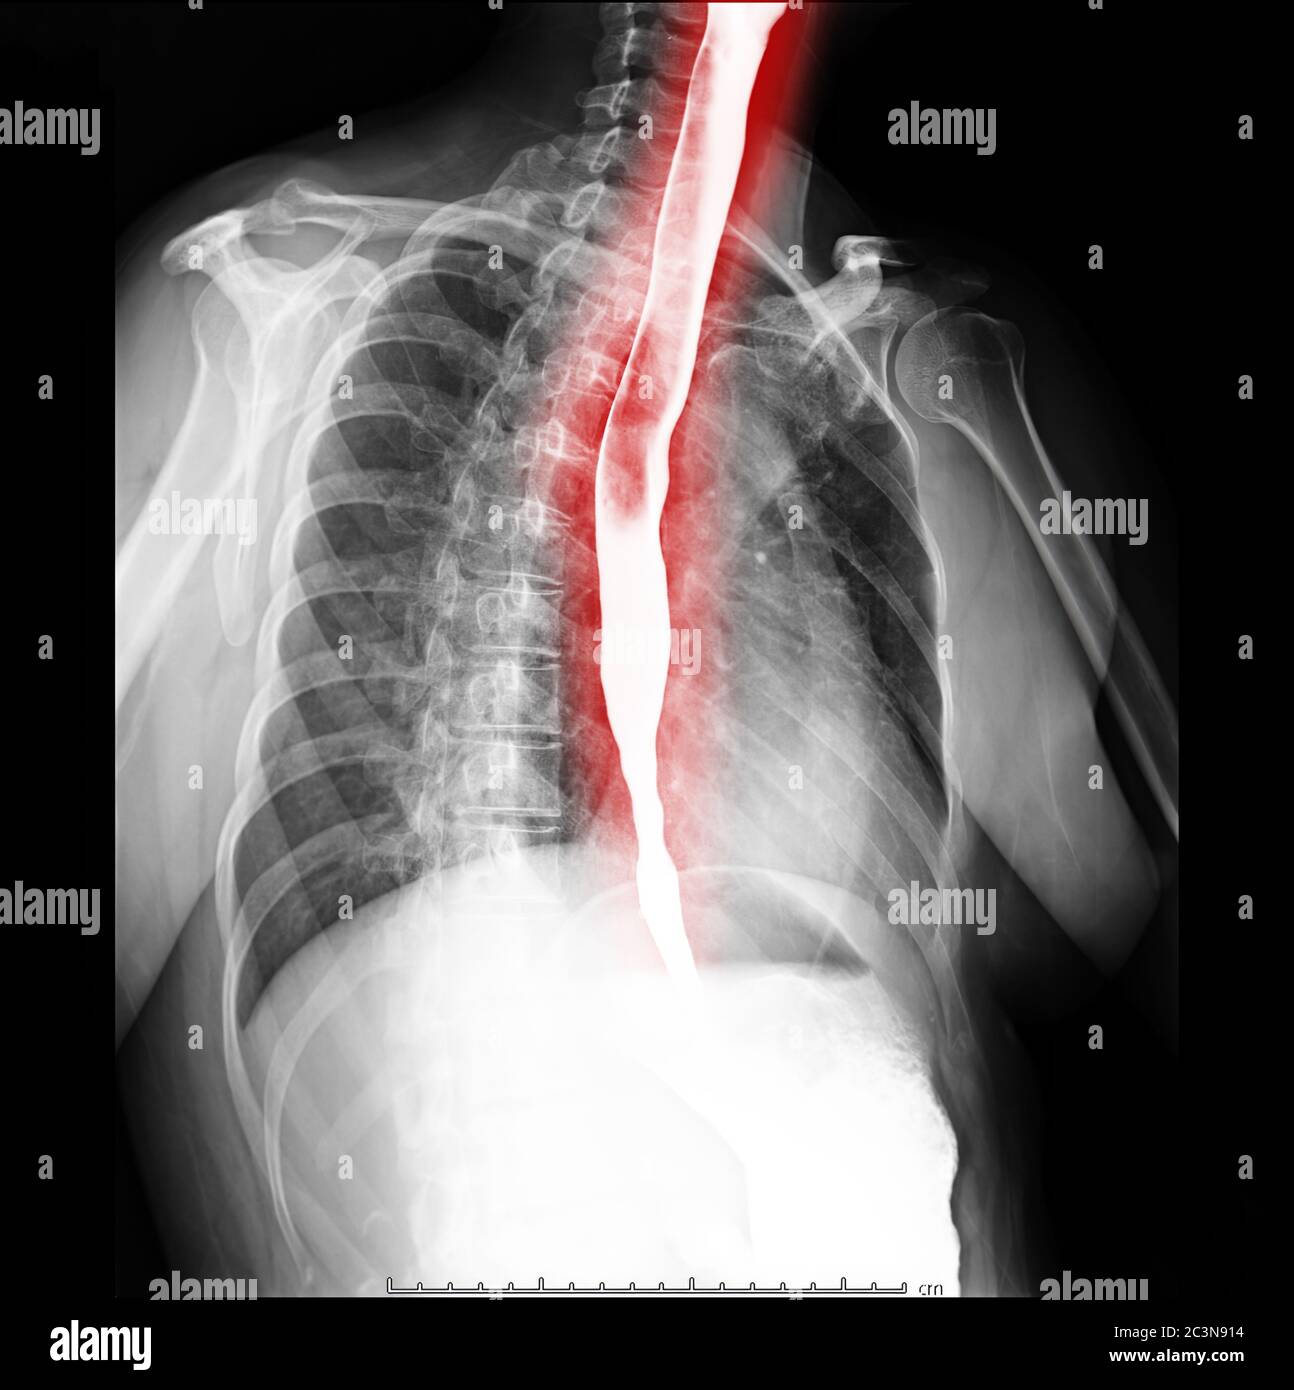 Esophagram or Barium swallow oblique view  showing esophagus for diagnosis GERD or Gastroesophageal reflux disease Stock Photo